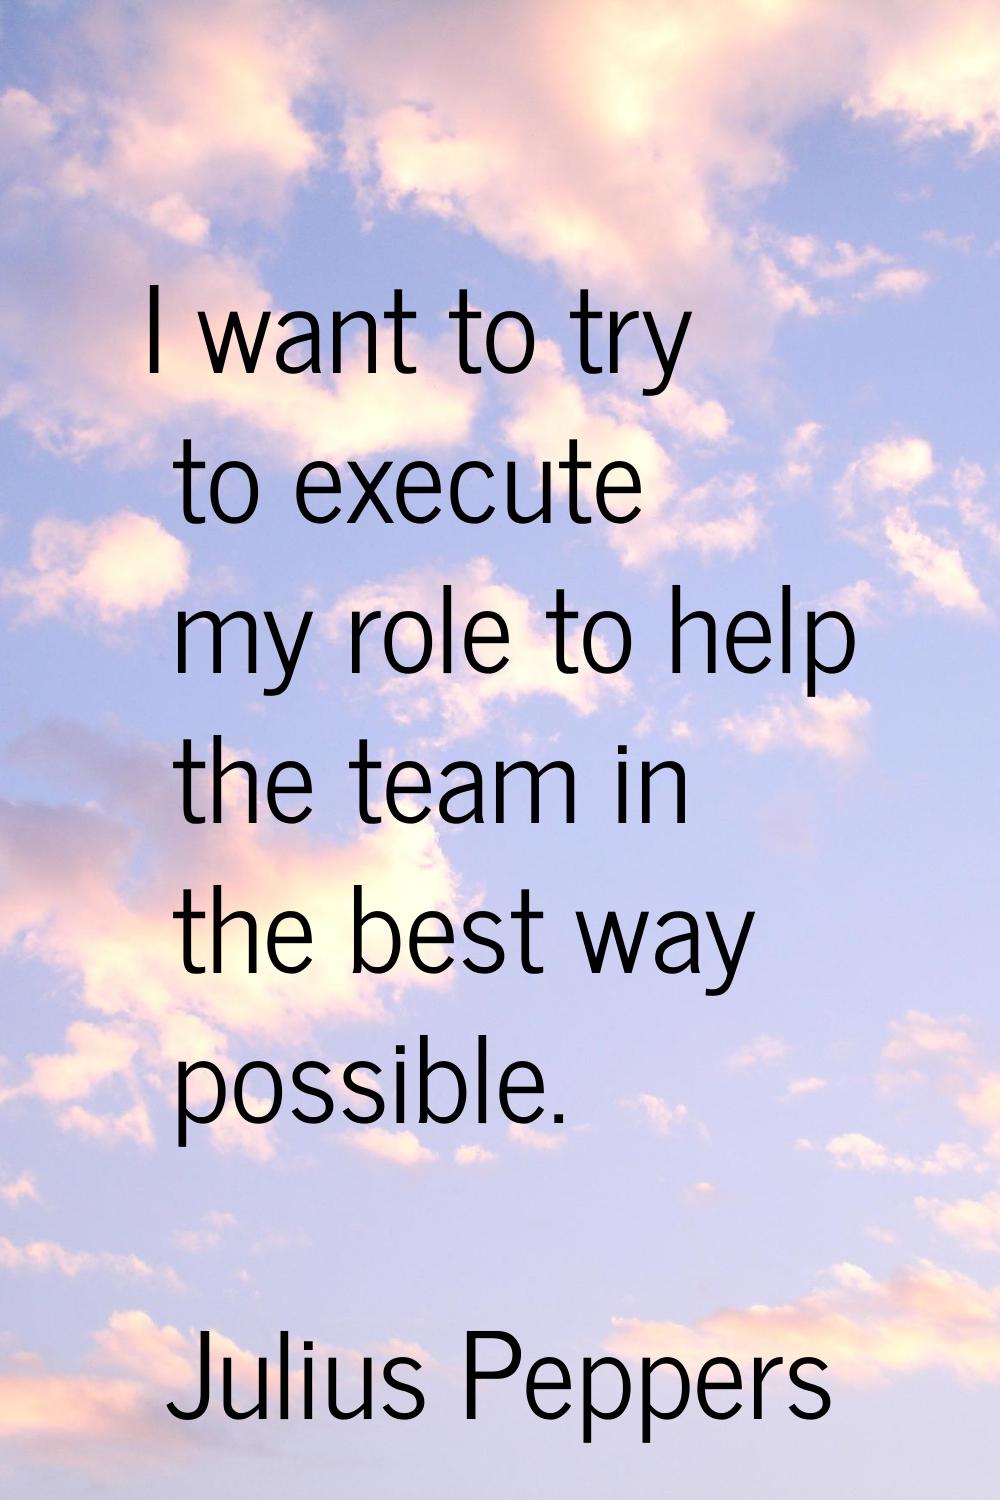 I want to try to execute my role to help the team in the best way possible.